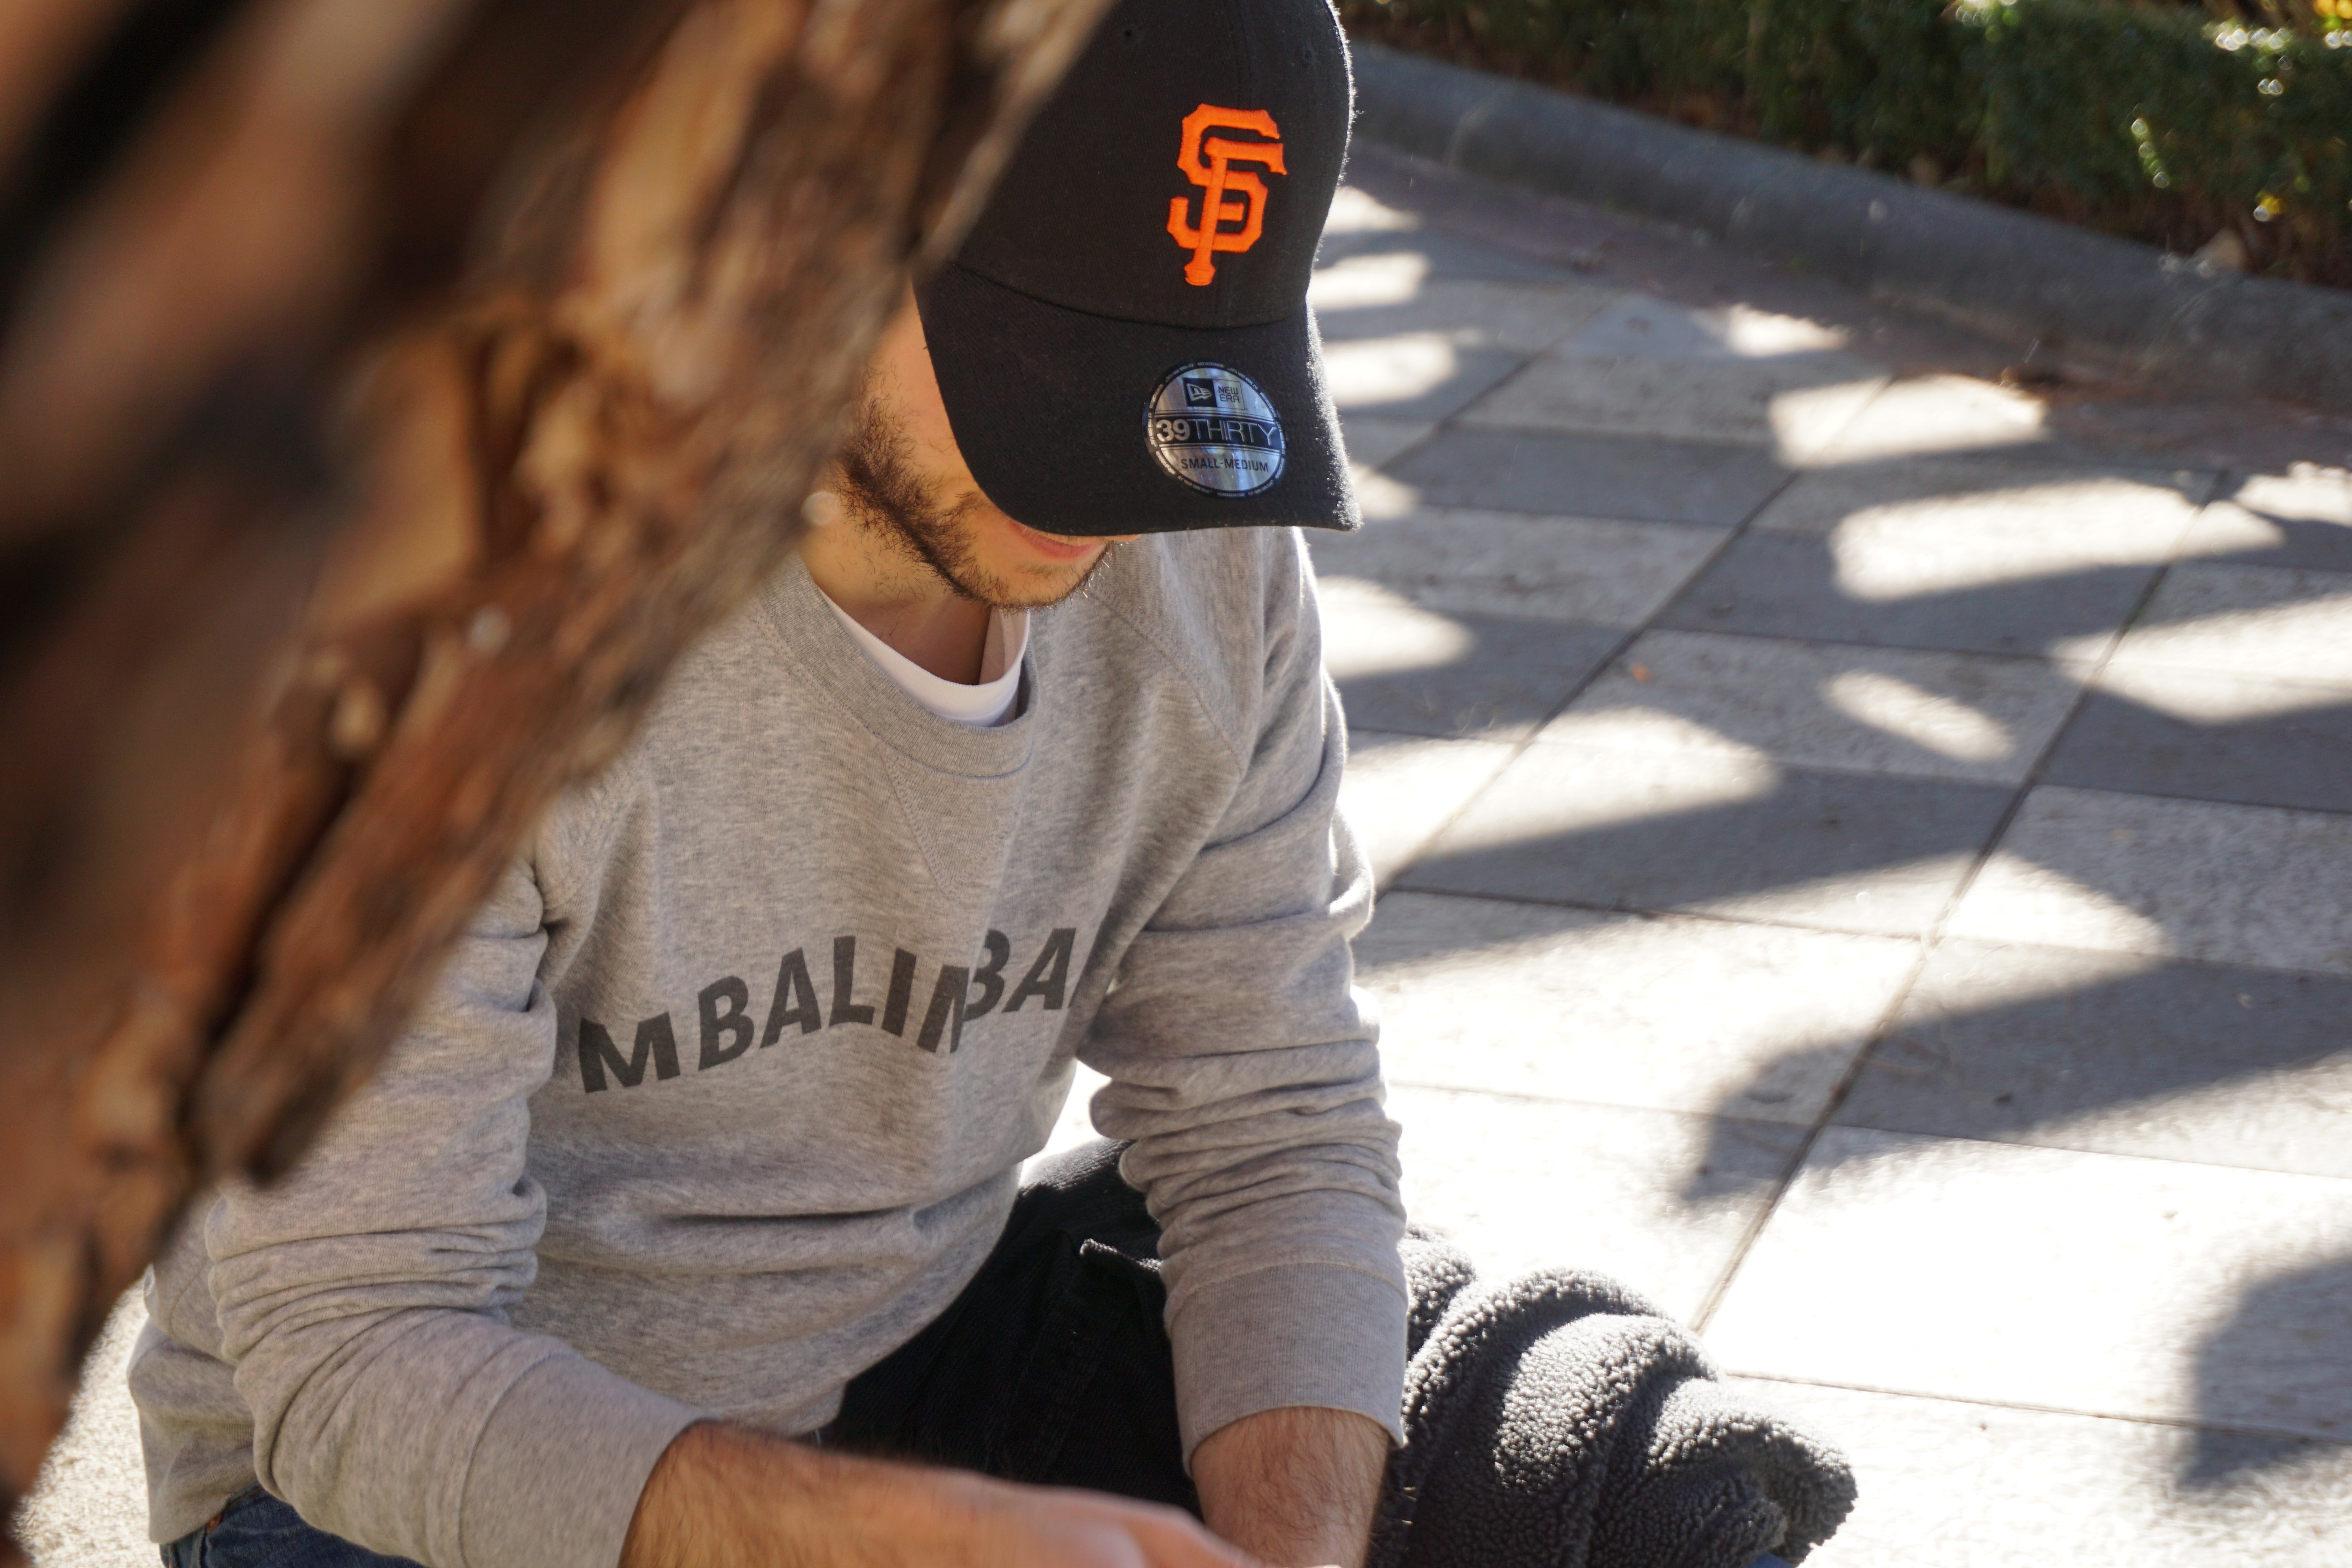 A man sits down at a bench outdoors looking down wearing a baseball cap with his face half covered.